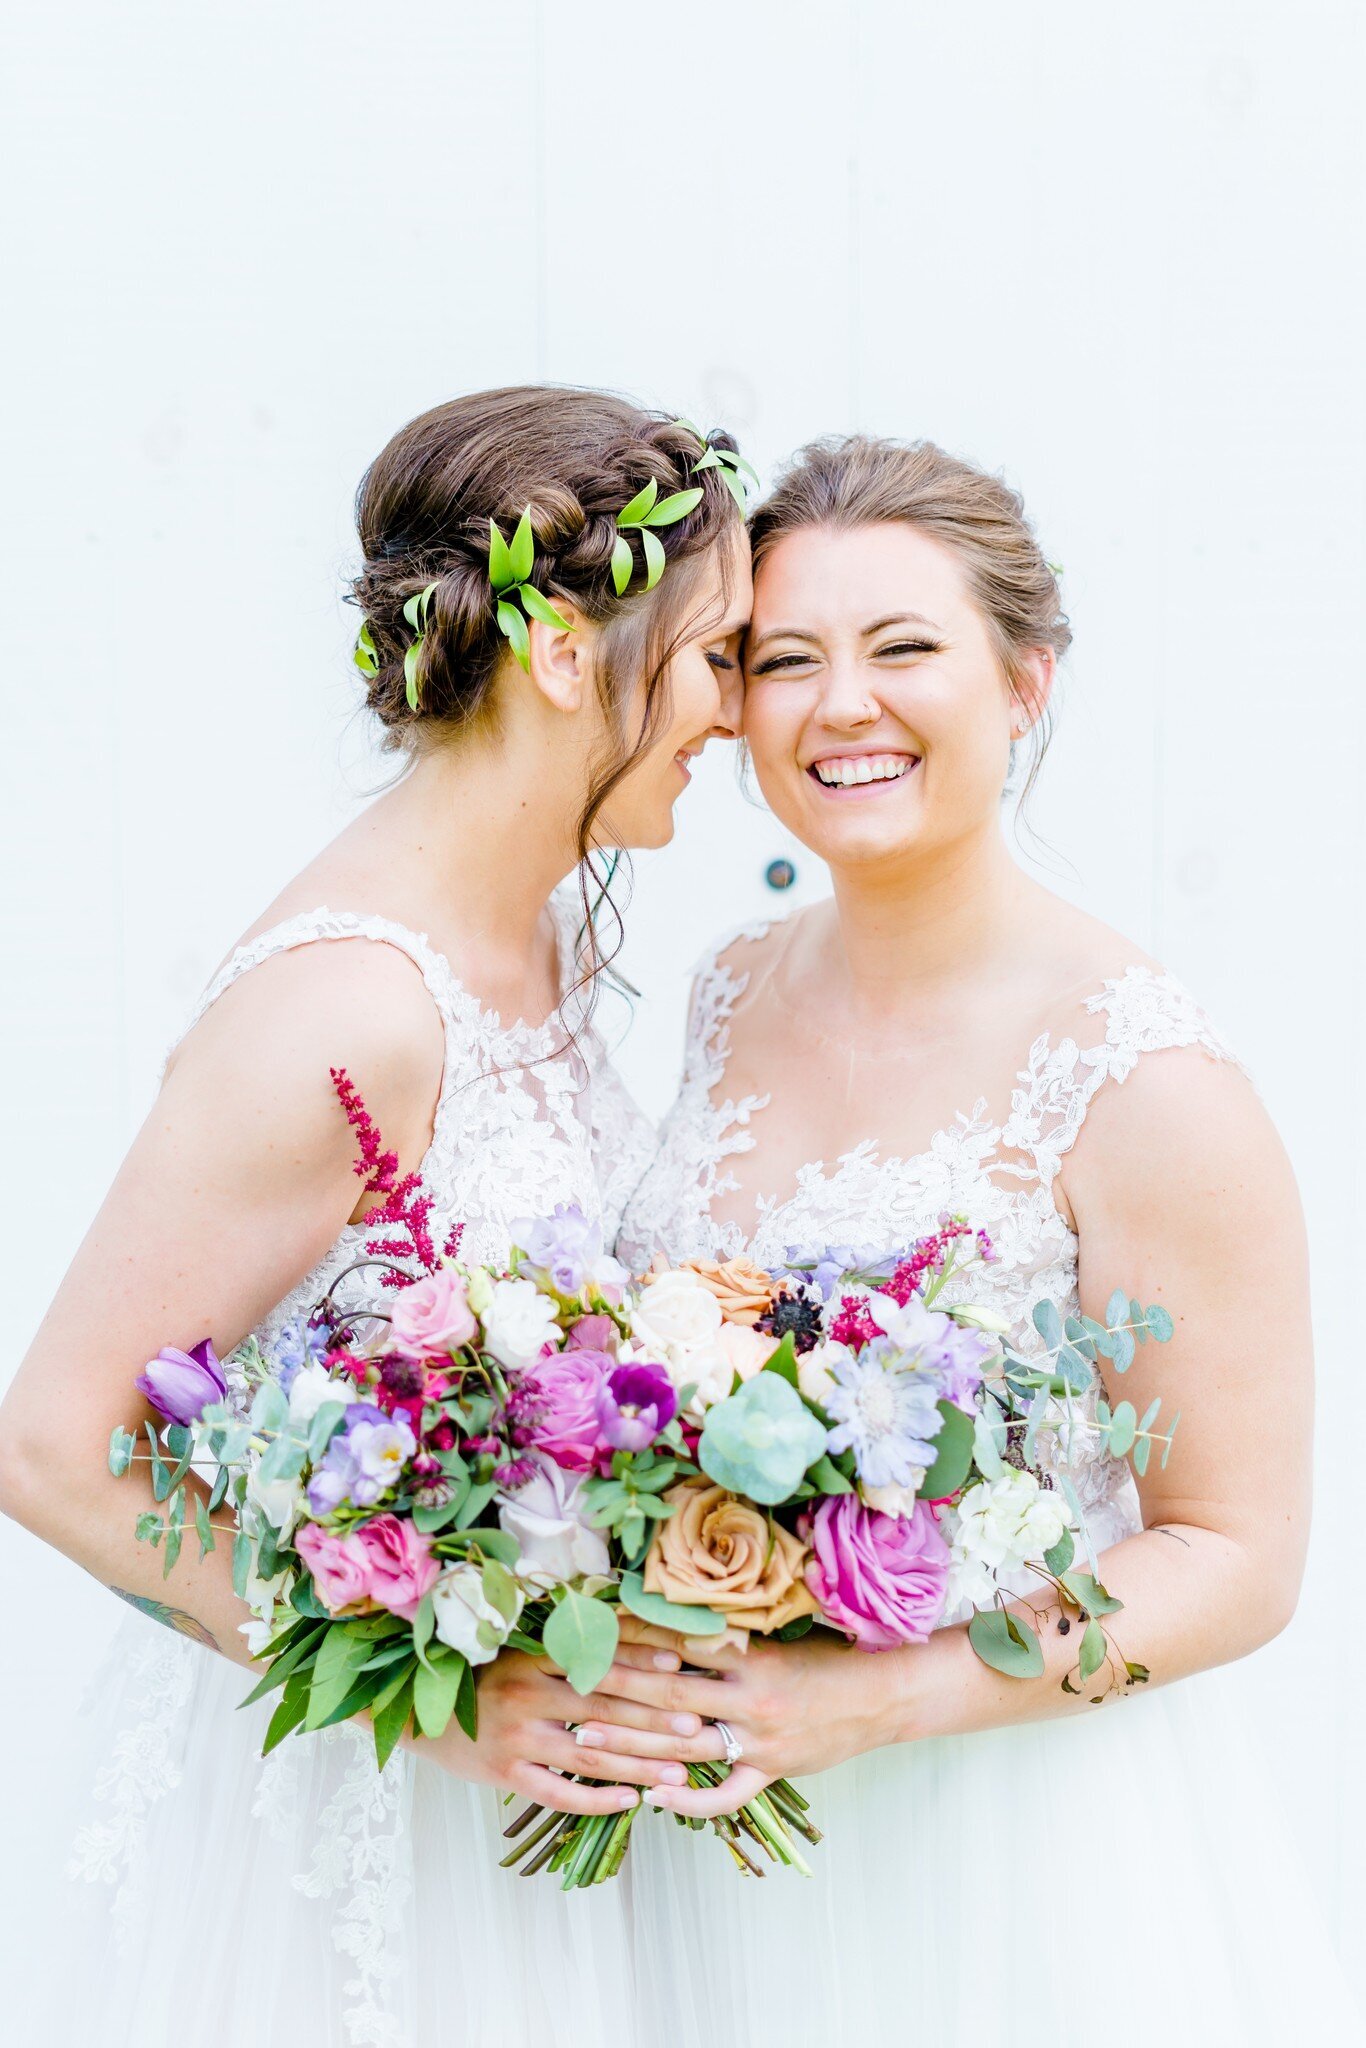 Couple smiling at Mayfair Farm Wedding Photos with Colorful Bouquets